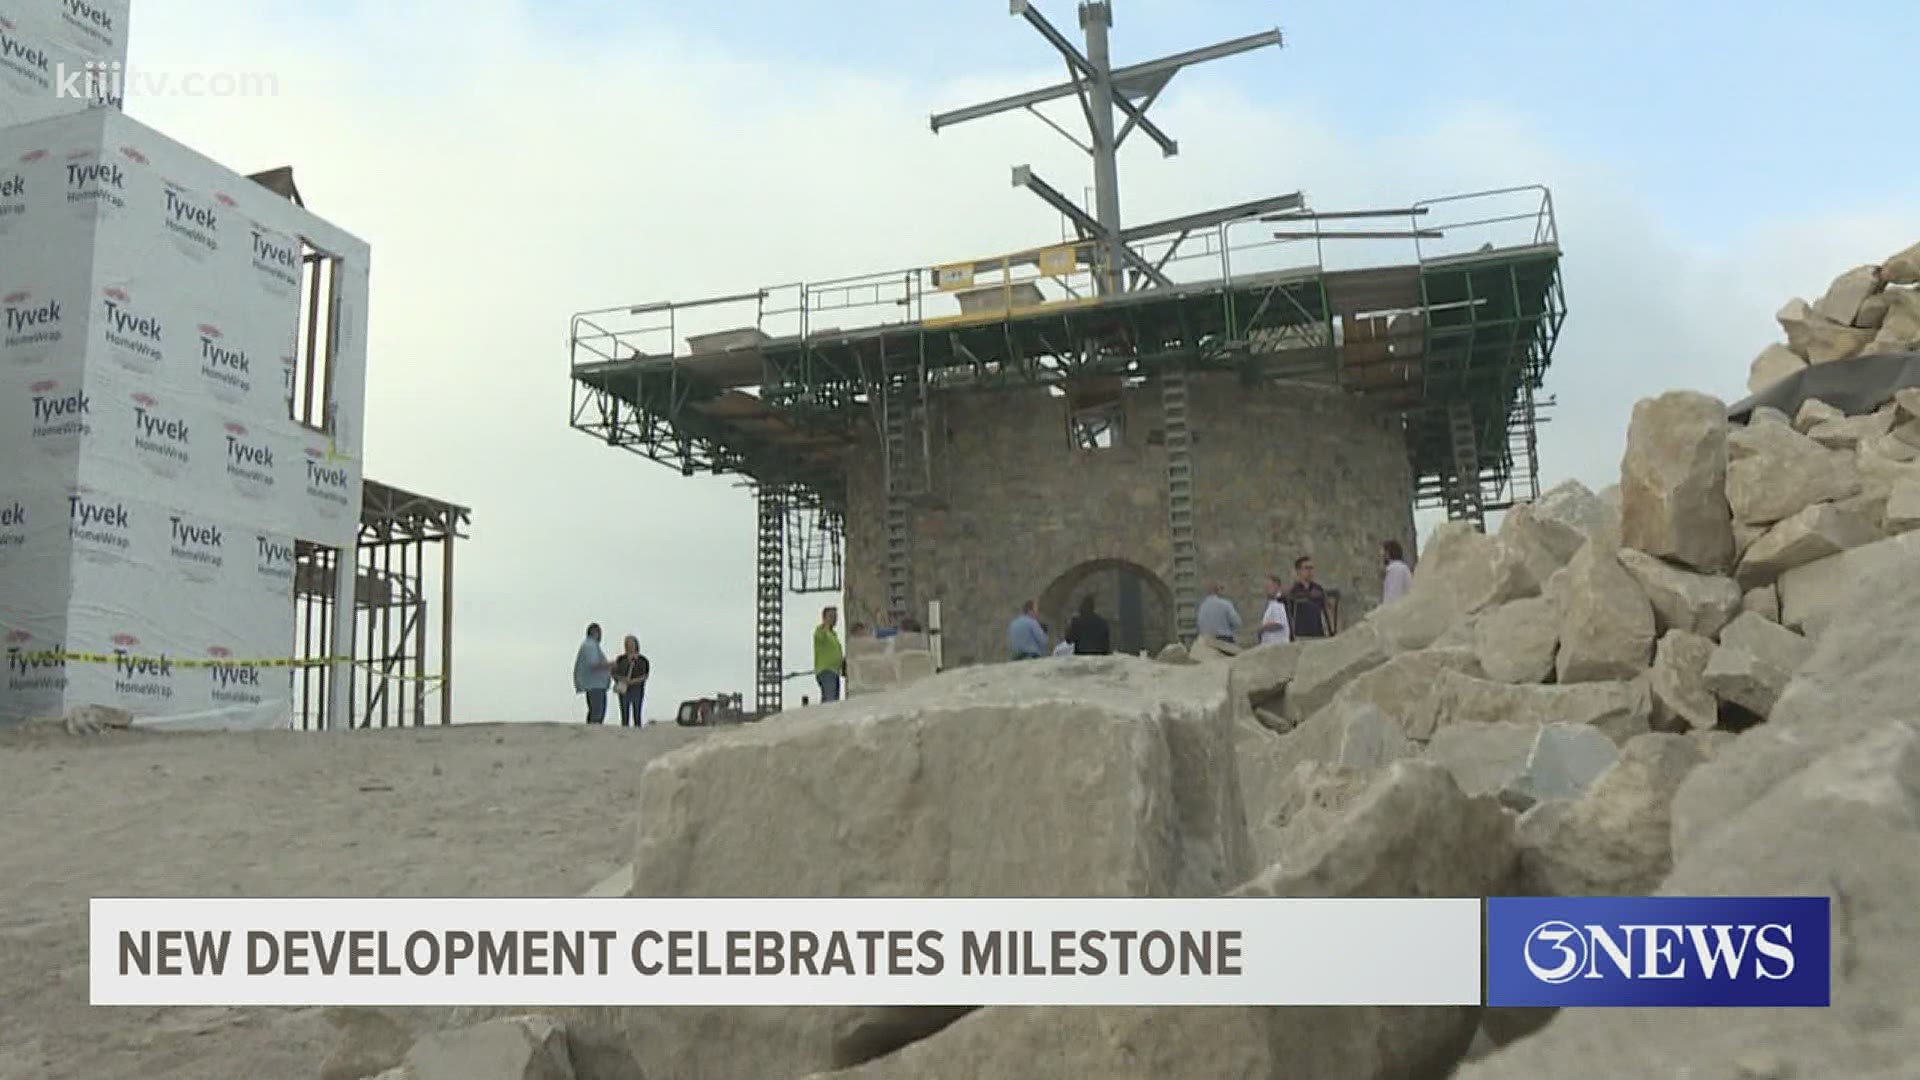 3News was given a closer look at the project during a ceremonial 'laying of the cornerstones'.